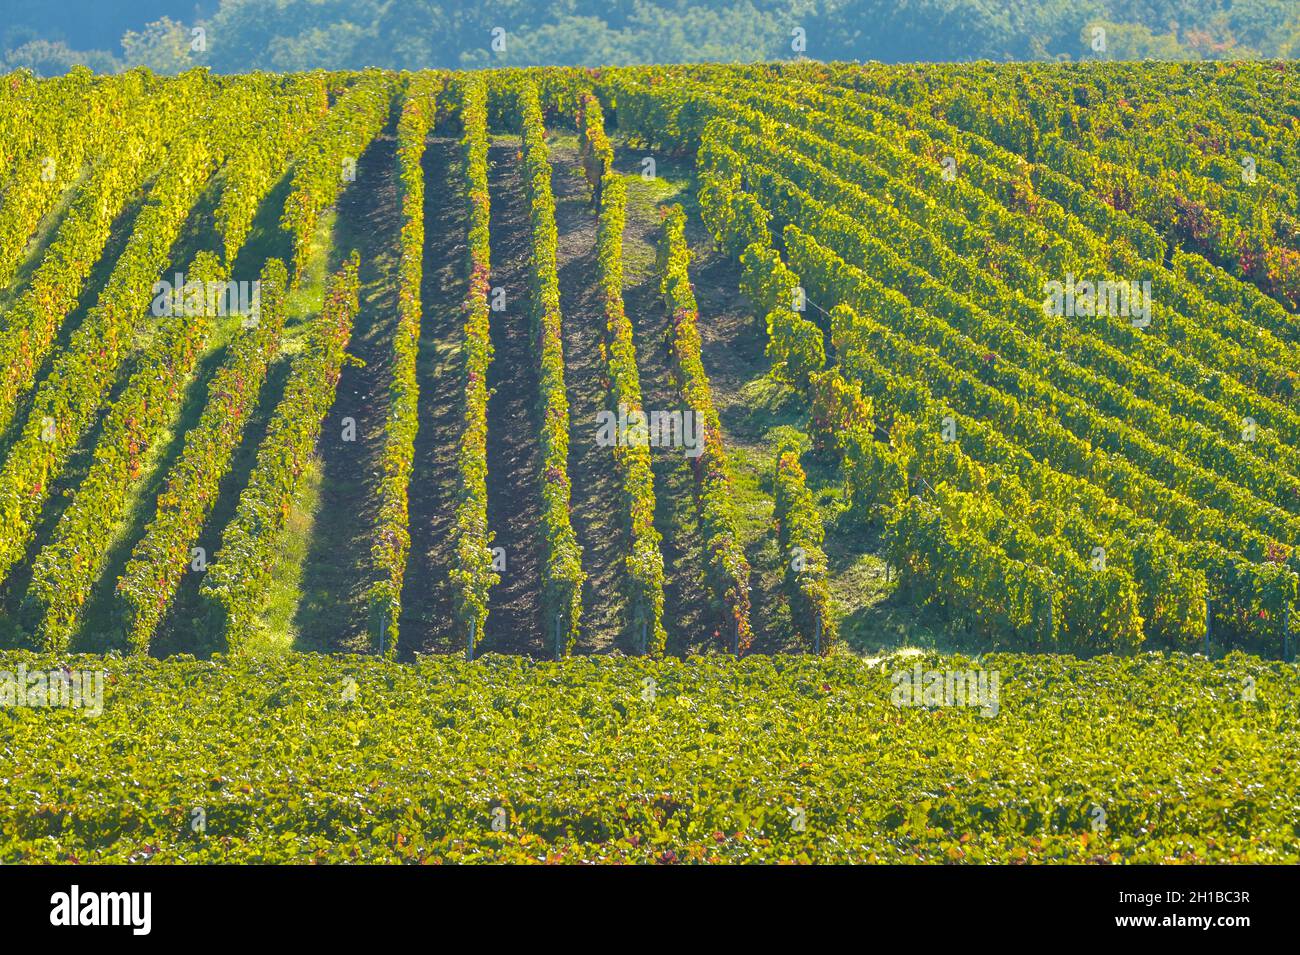 CHAMPAGNE VINEYARDS VILLEDOMANGE IN MARNE DEPARTMENT, CHAMPAGNE-ARDENNES, FRANCE, EUROPE Stock Photo